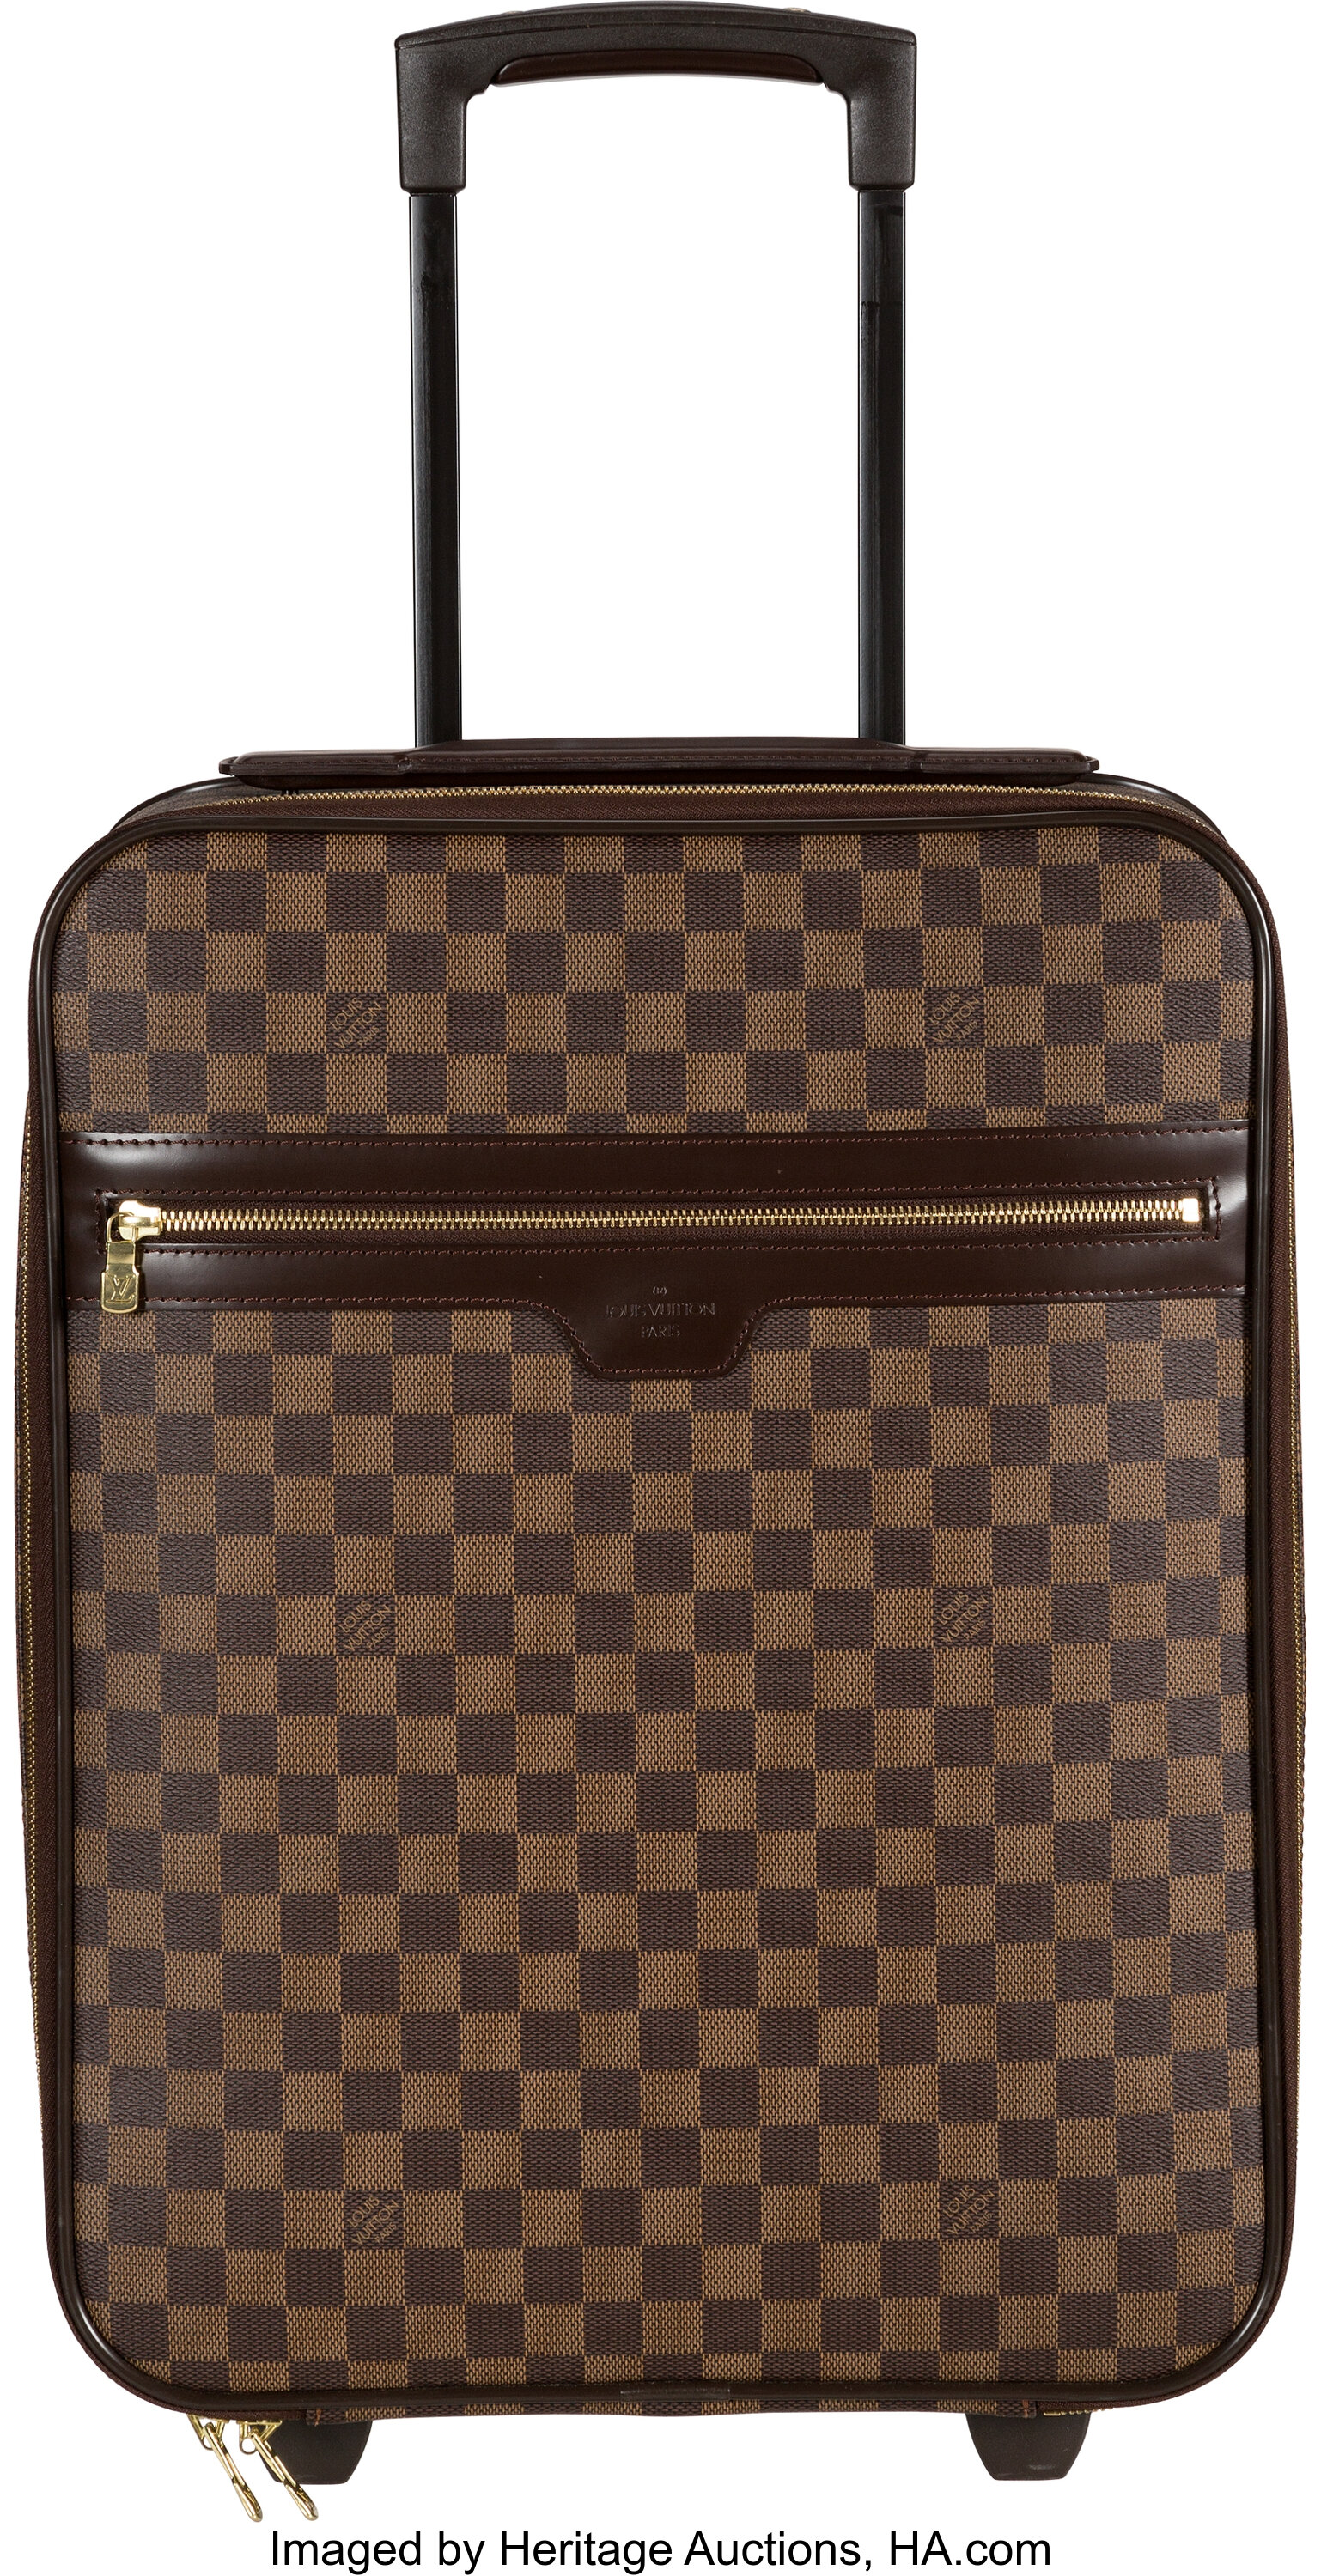 Sold at Auction: Louis Vuitton 2019 Limited Edition Damier